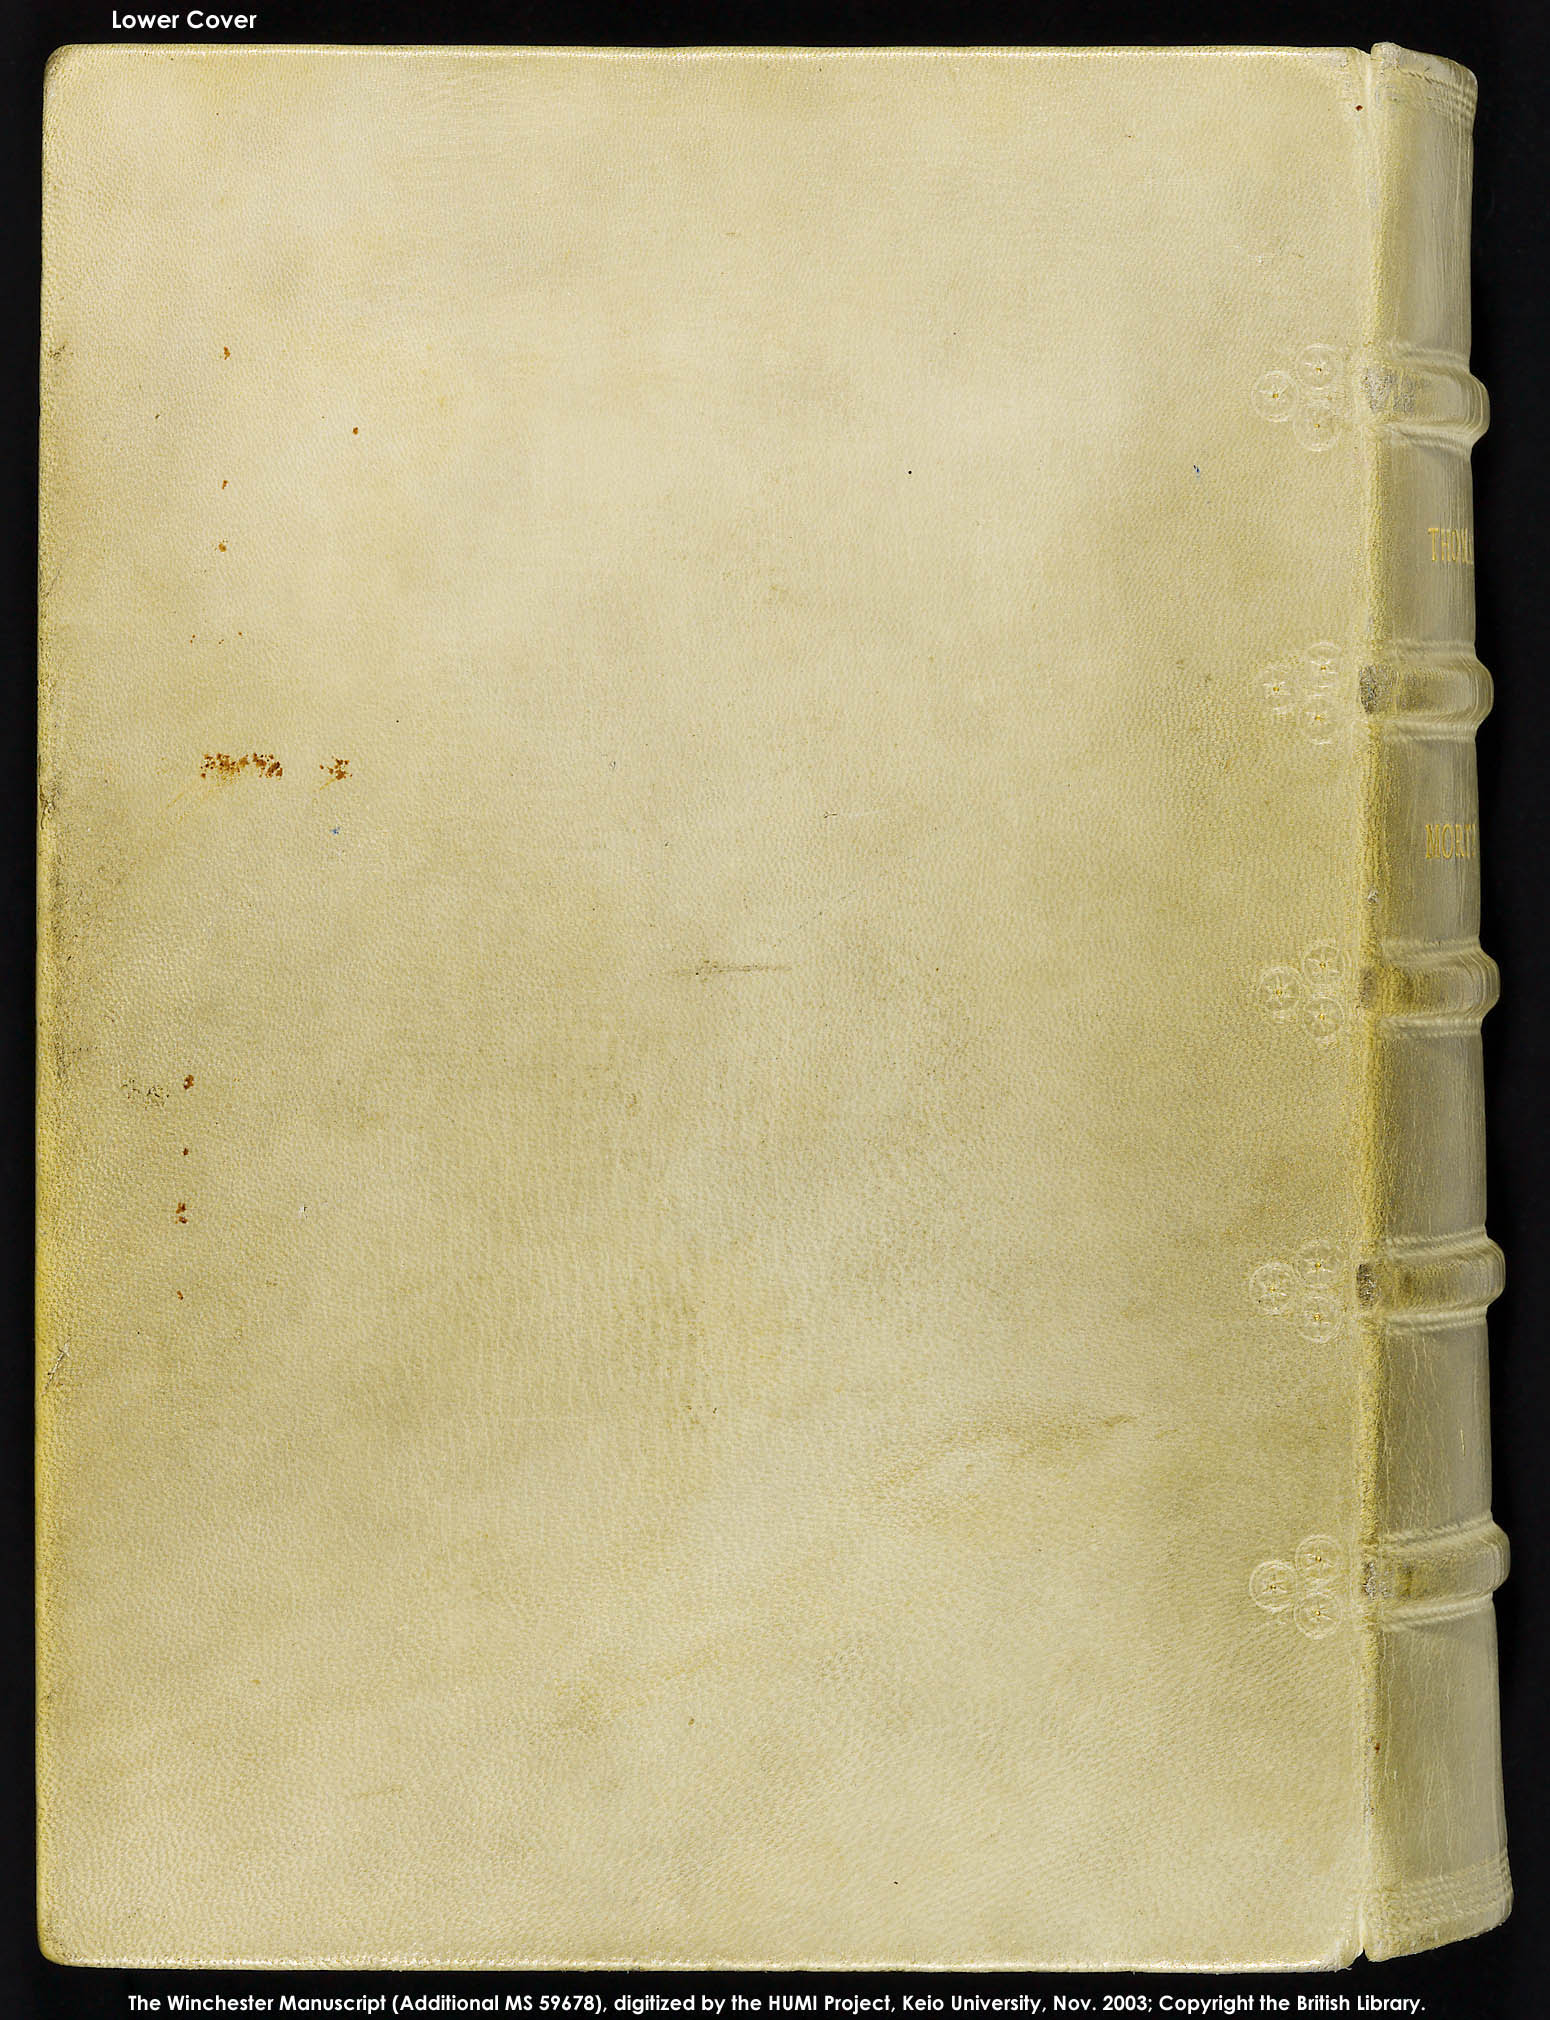 Lower Cover